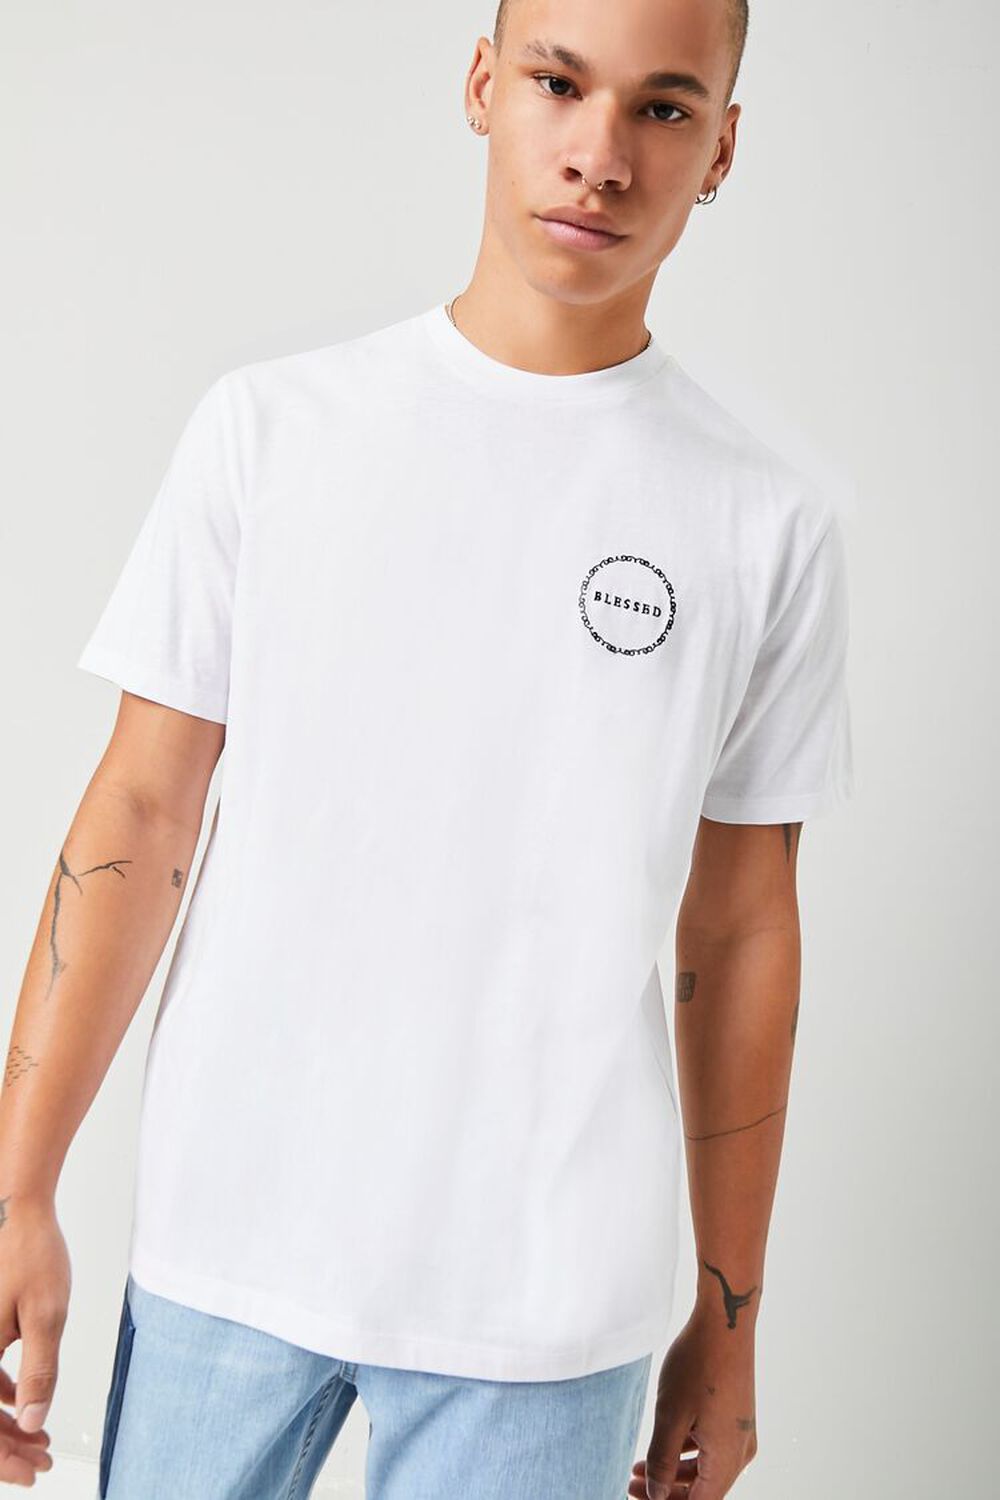 WHITE/BLACK Embroidered Blessed Tee, image 1